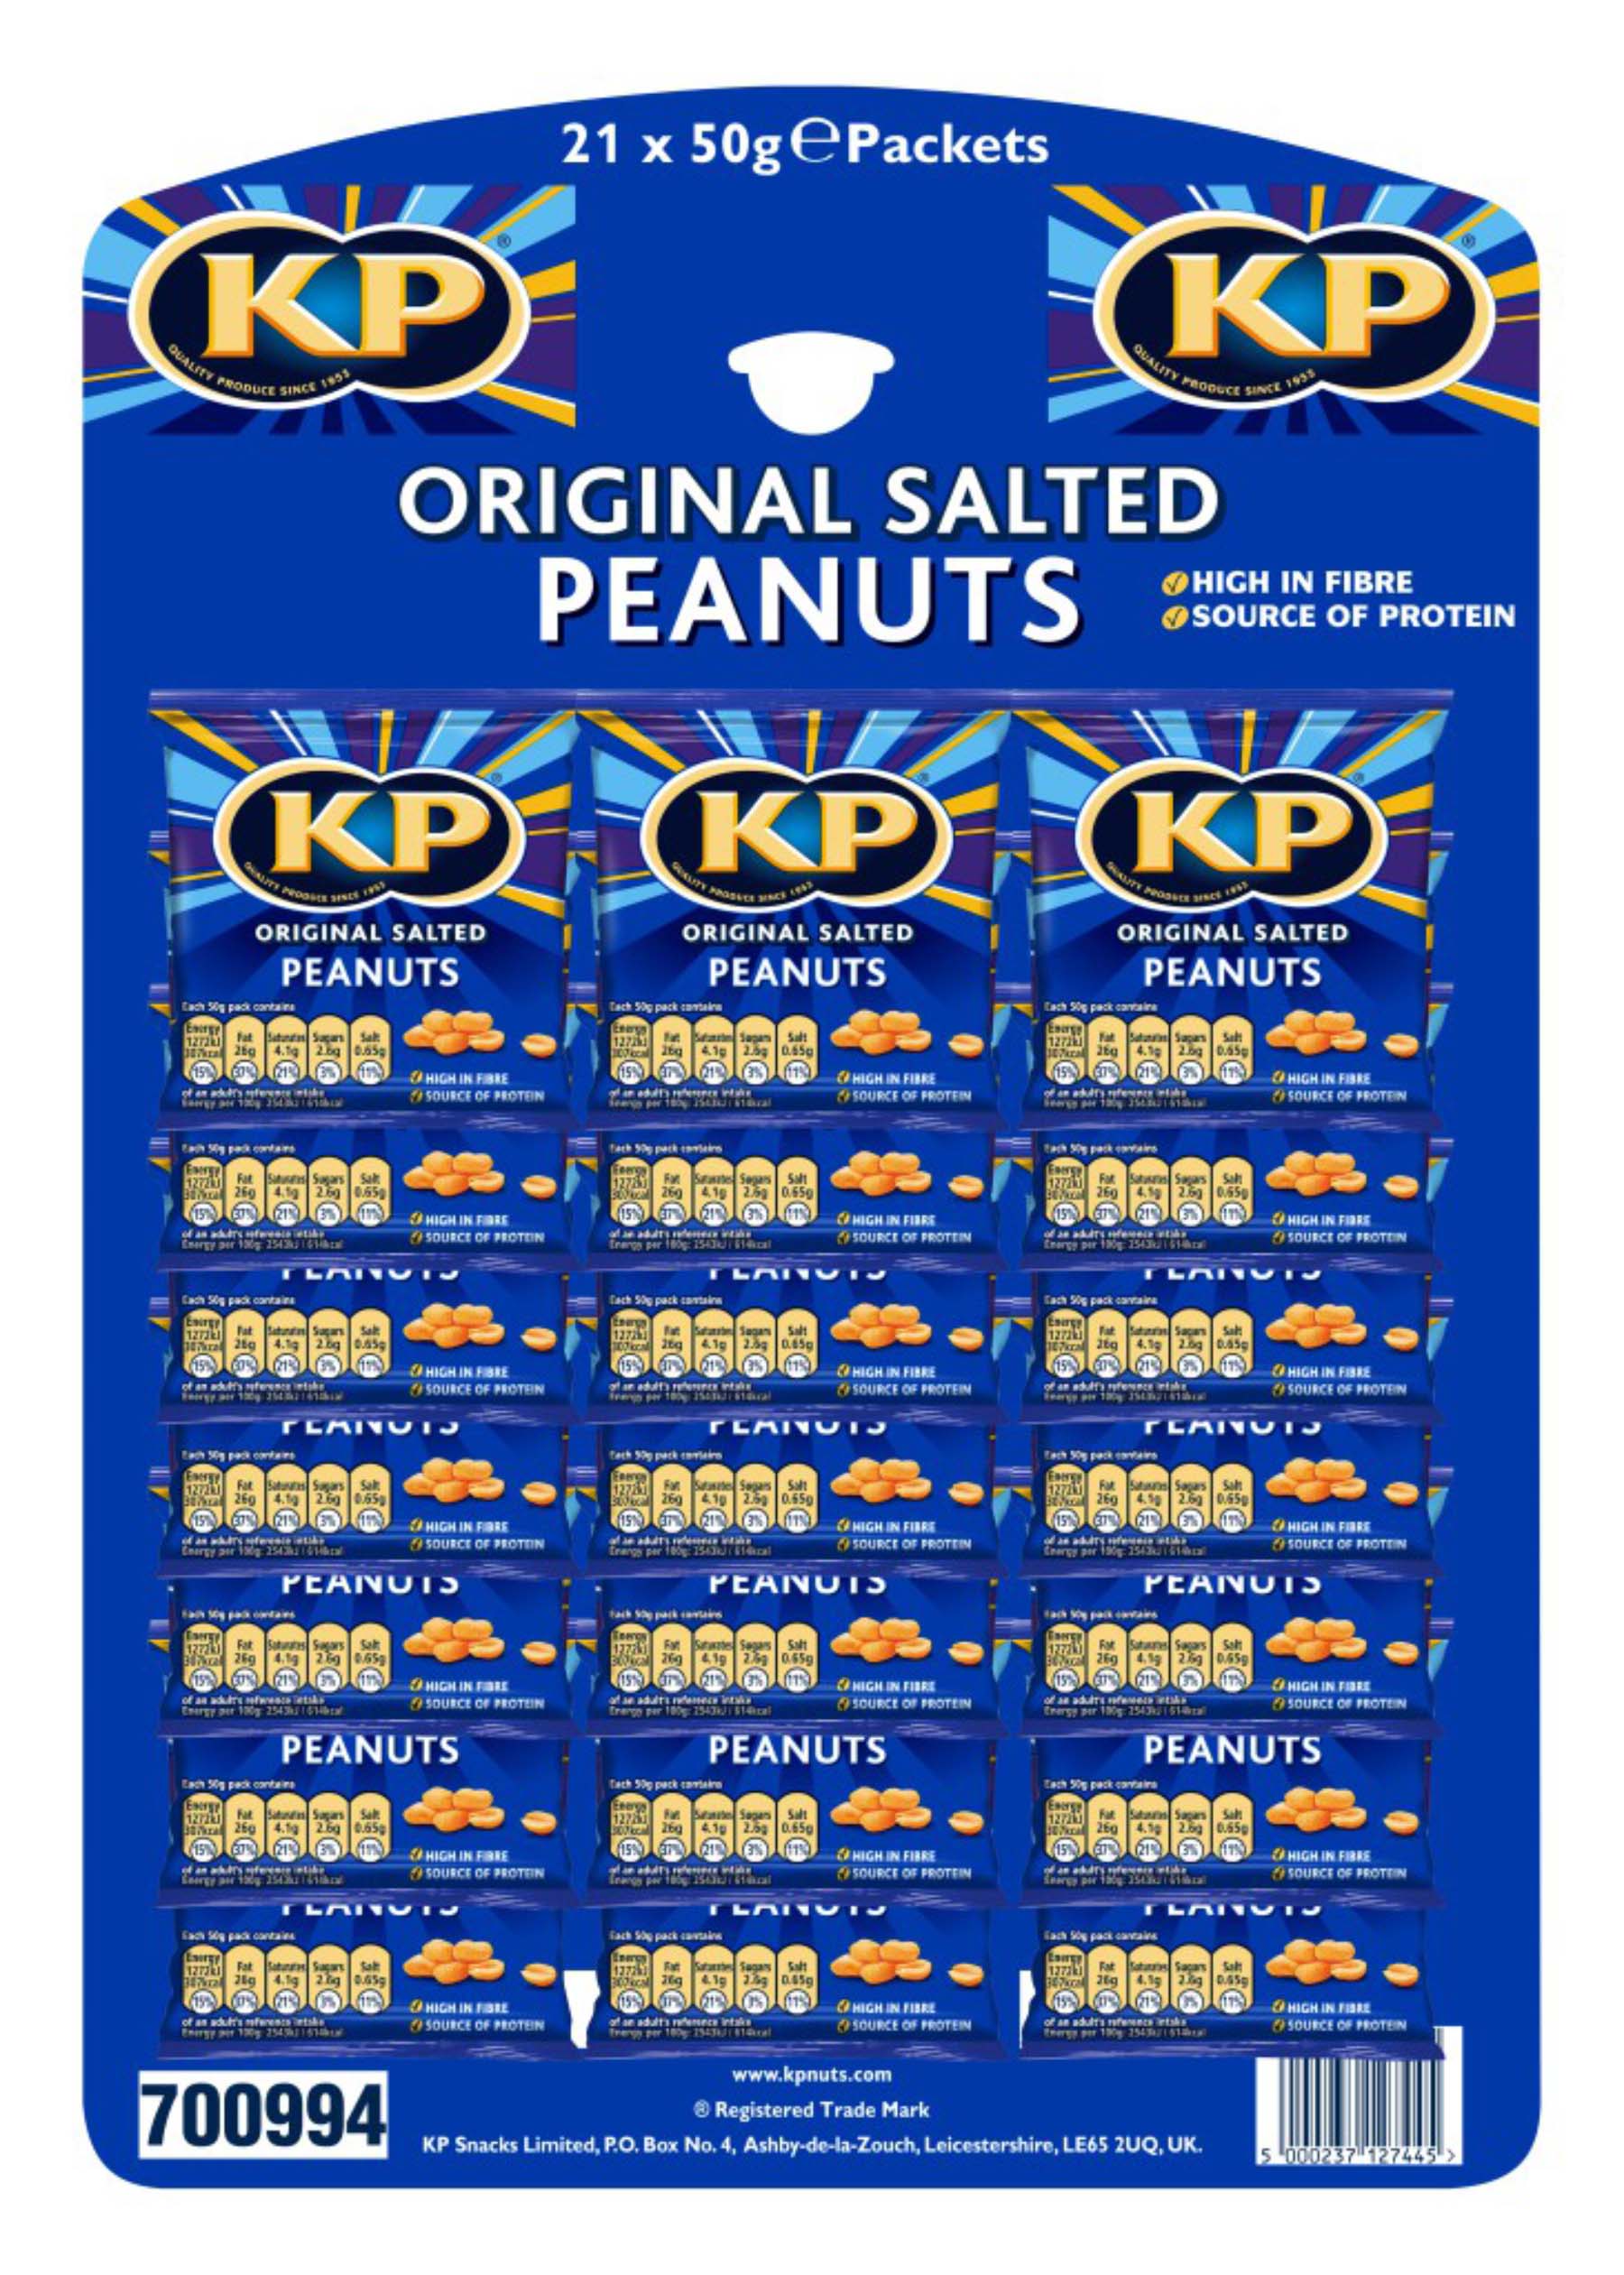 KP NUTS READY SALTED CARD 21 x 50G